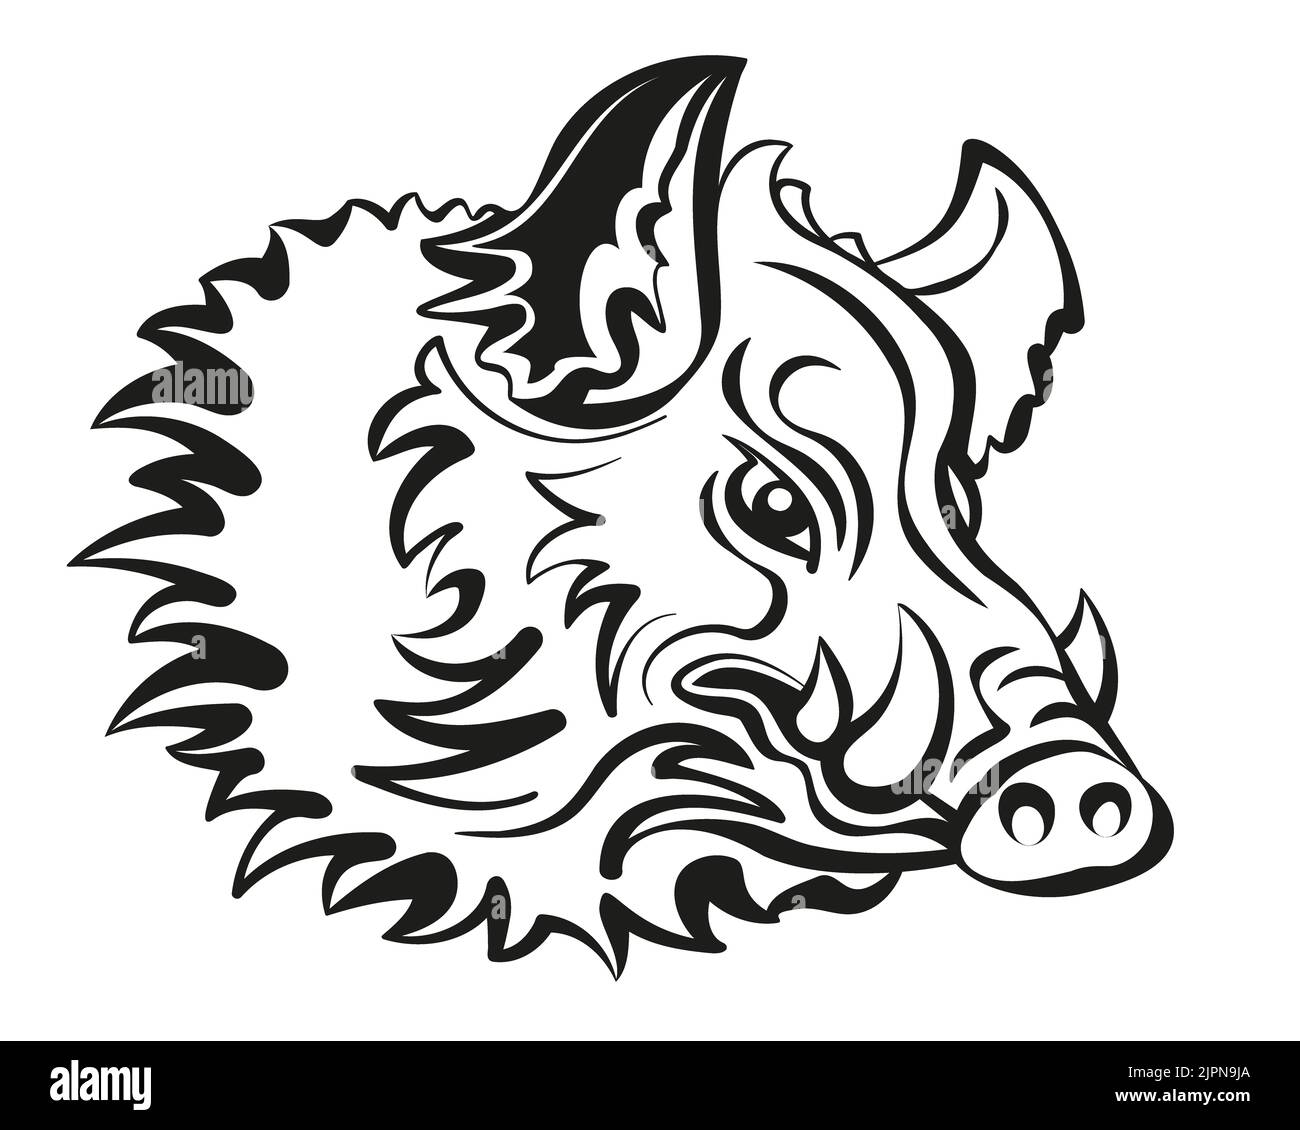 Boar, Wild Hog, Feral Pig with shaggy fur, sharp fangs, dangerous, menacing look, ready to attack. Isolated illustration, black and white on white. Stock Photo